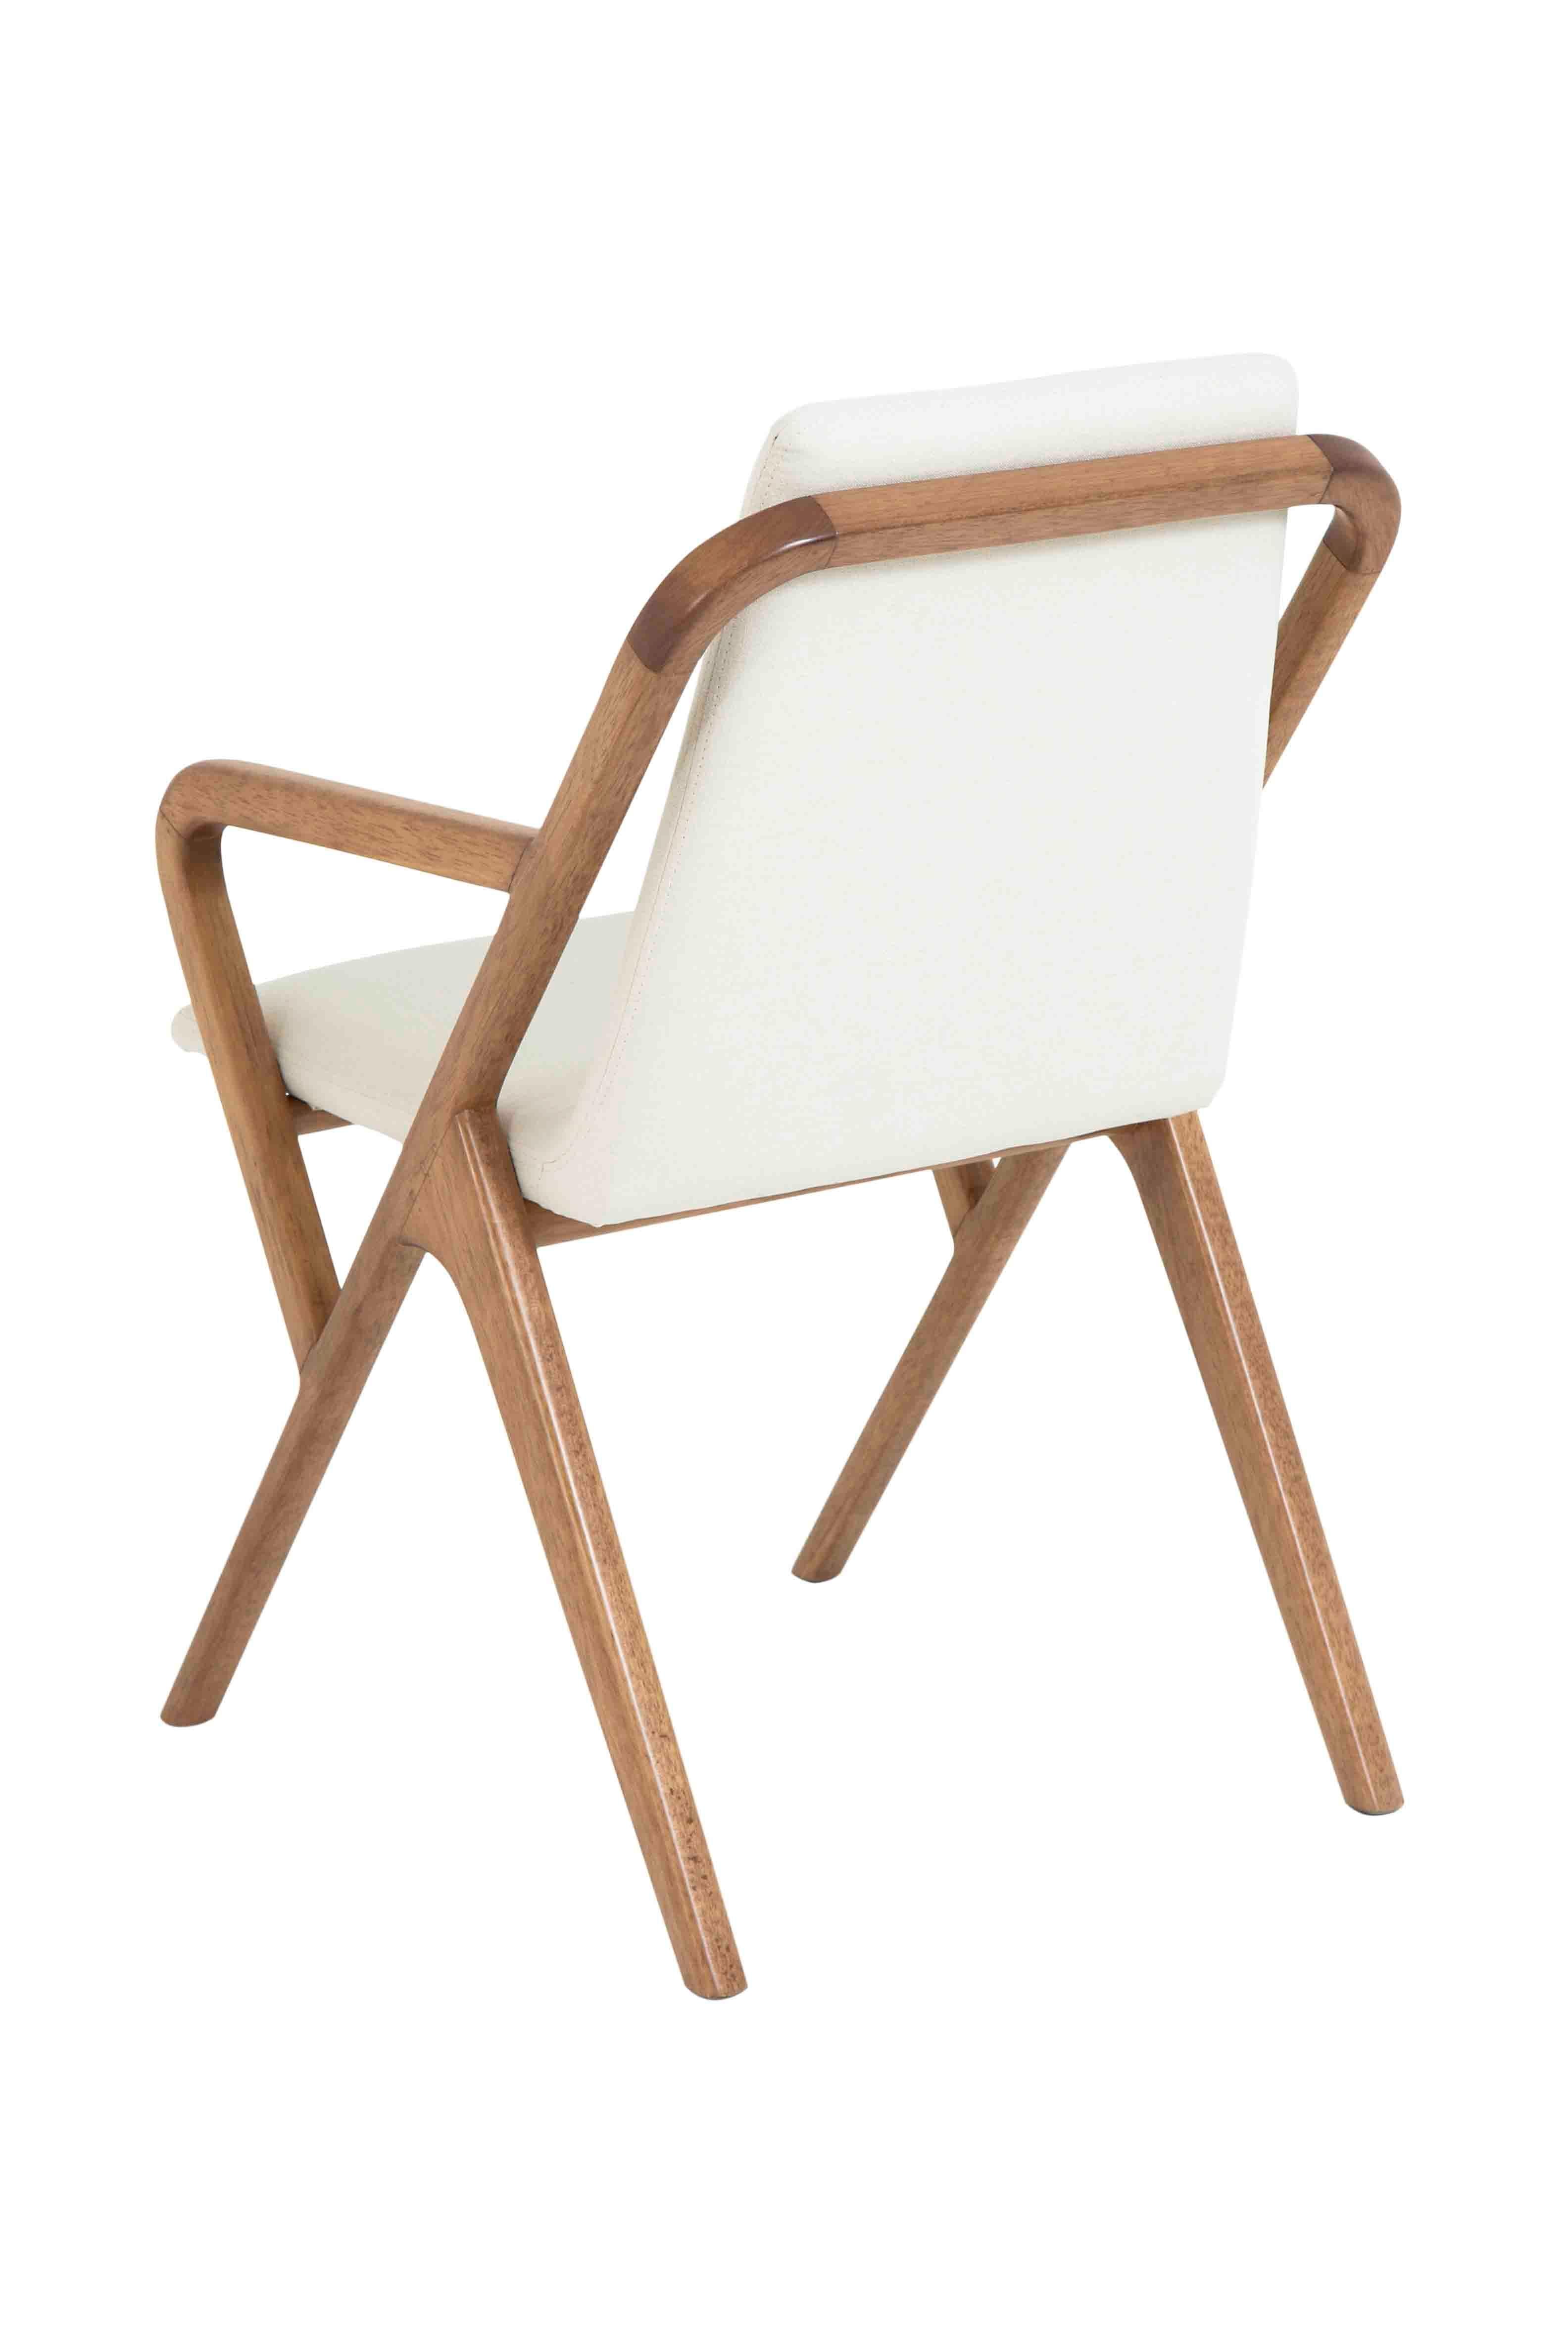 Whit our Quadratta dining chair you’ll be enjoying home-cooked meals in style.

Studiokaza products are available in different sizes and finishes. 

 